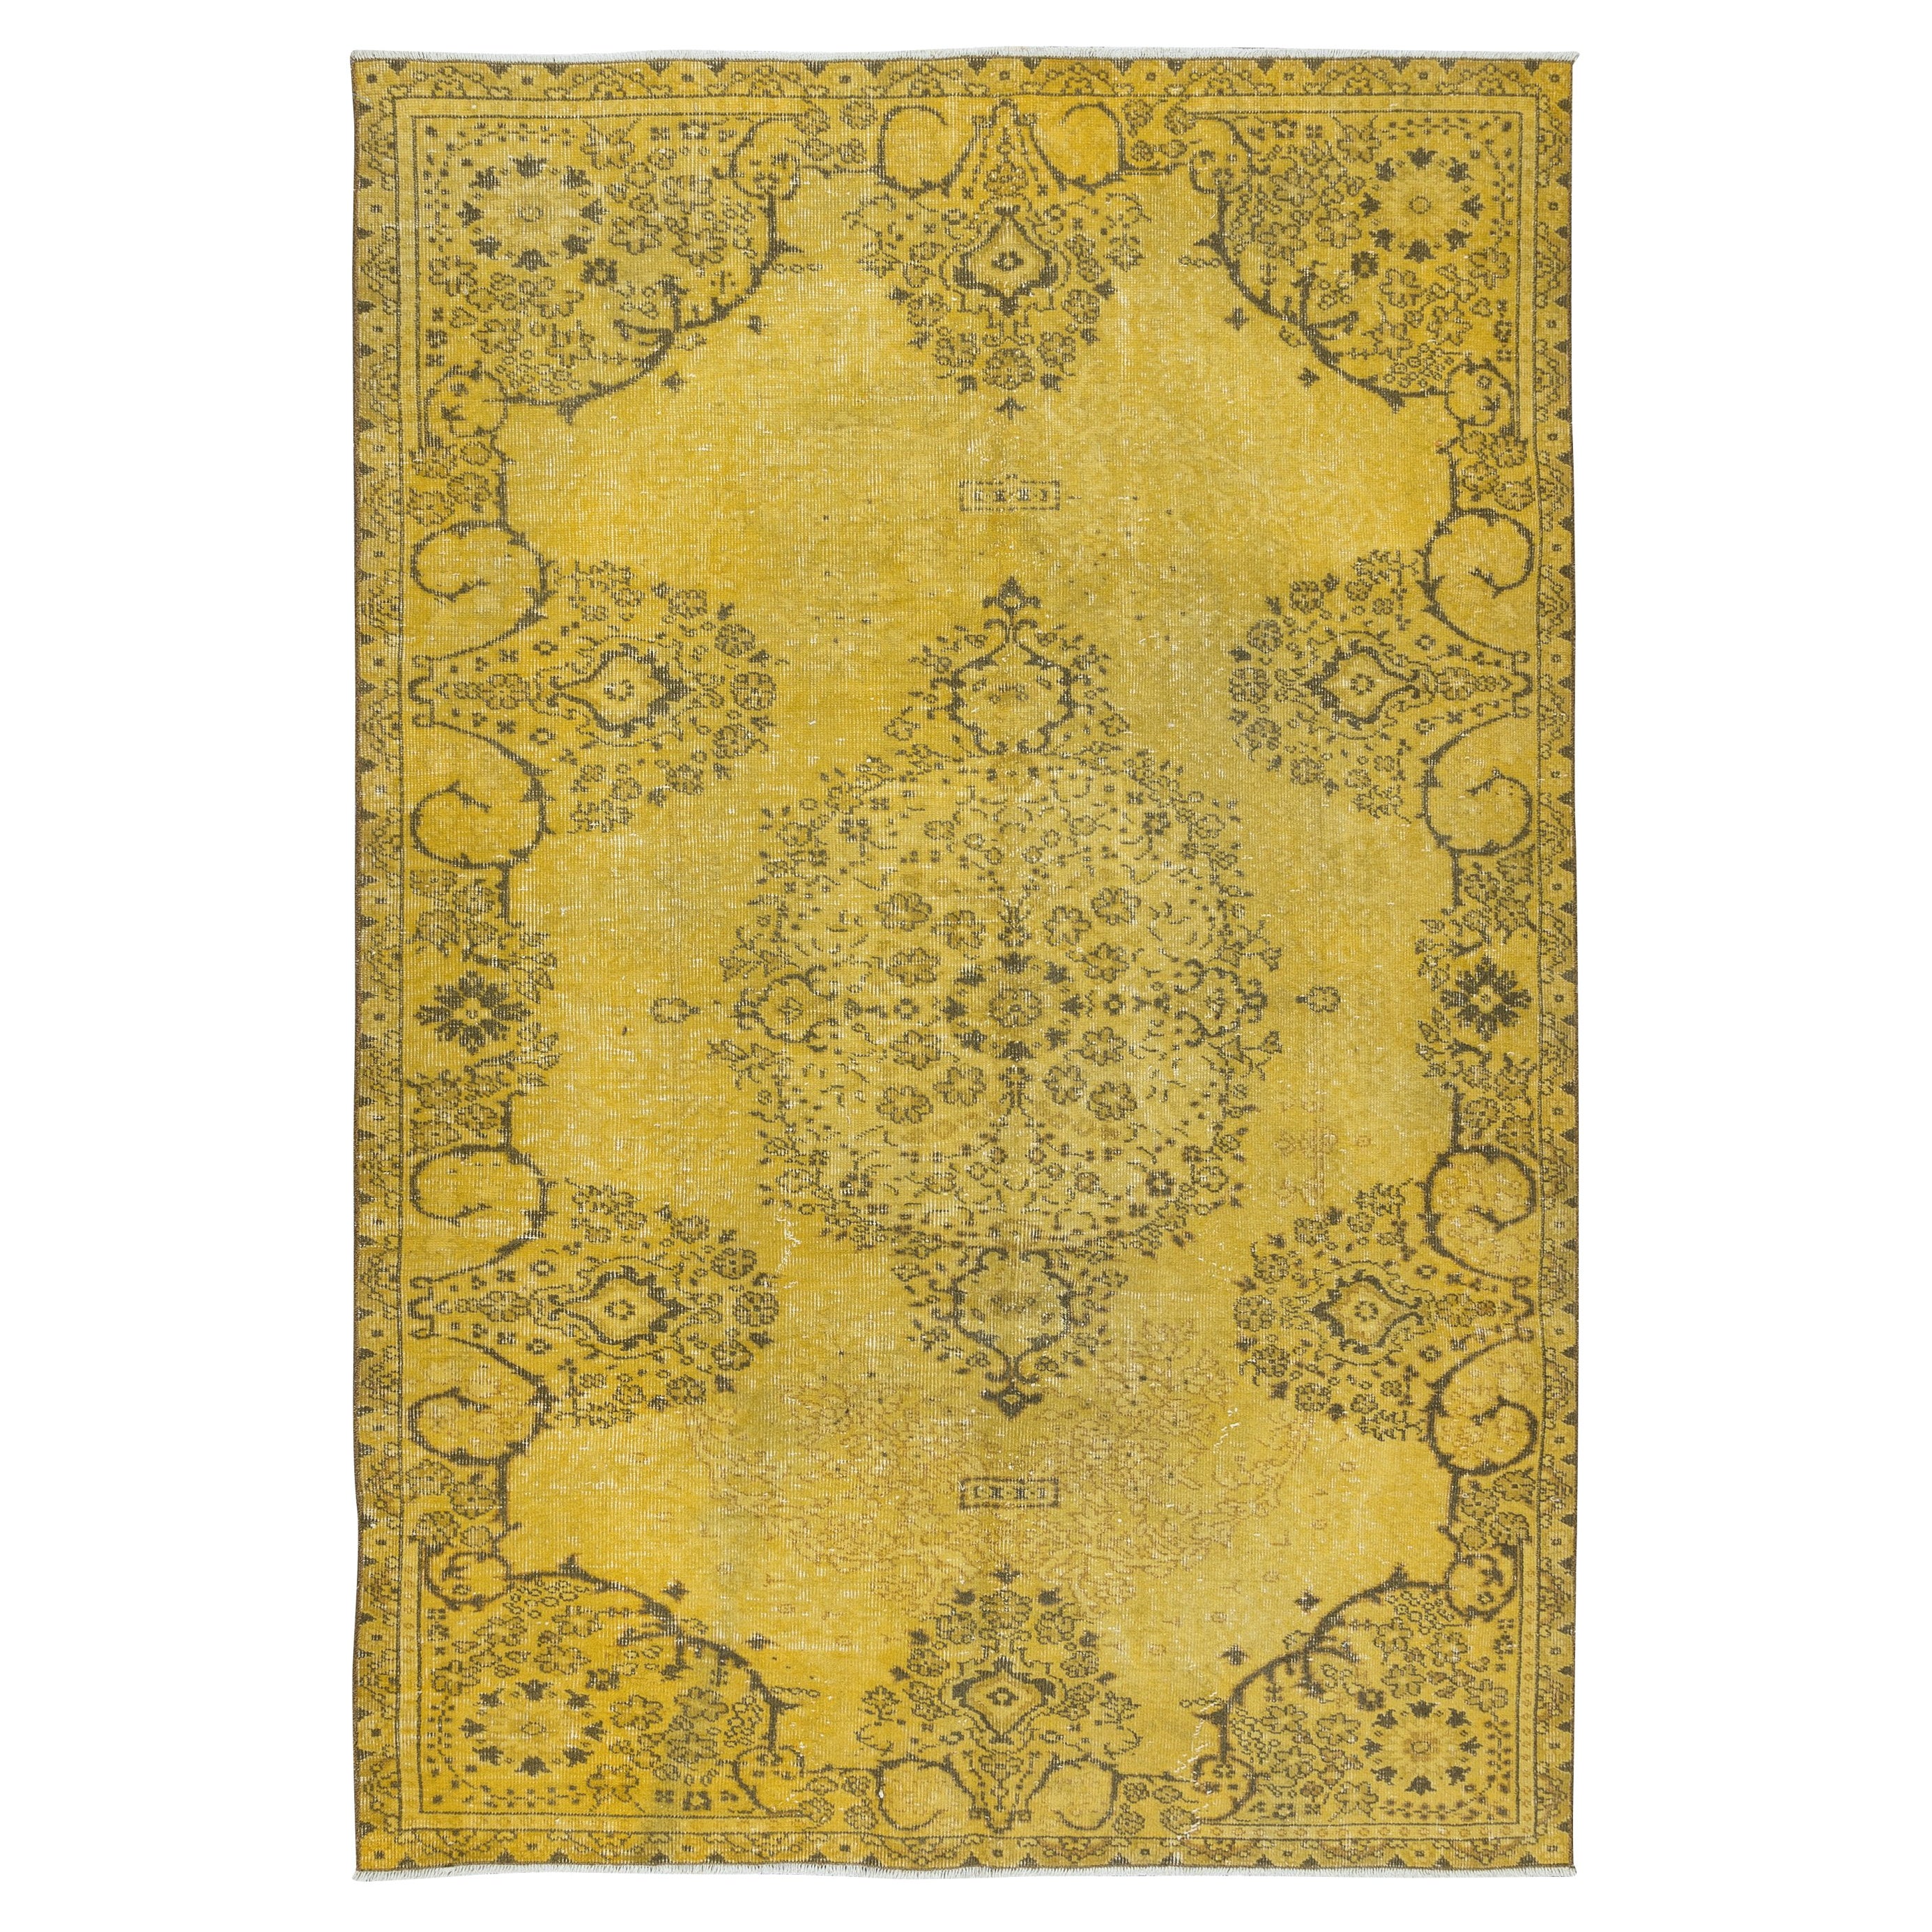 5.5x8 Ft Upcycled Handmade Turkish Area Rug, Contemporary Yellow OverDyed Carpet For Sale